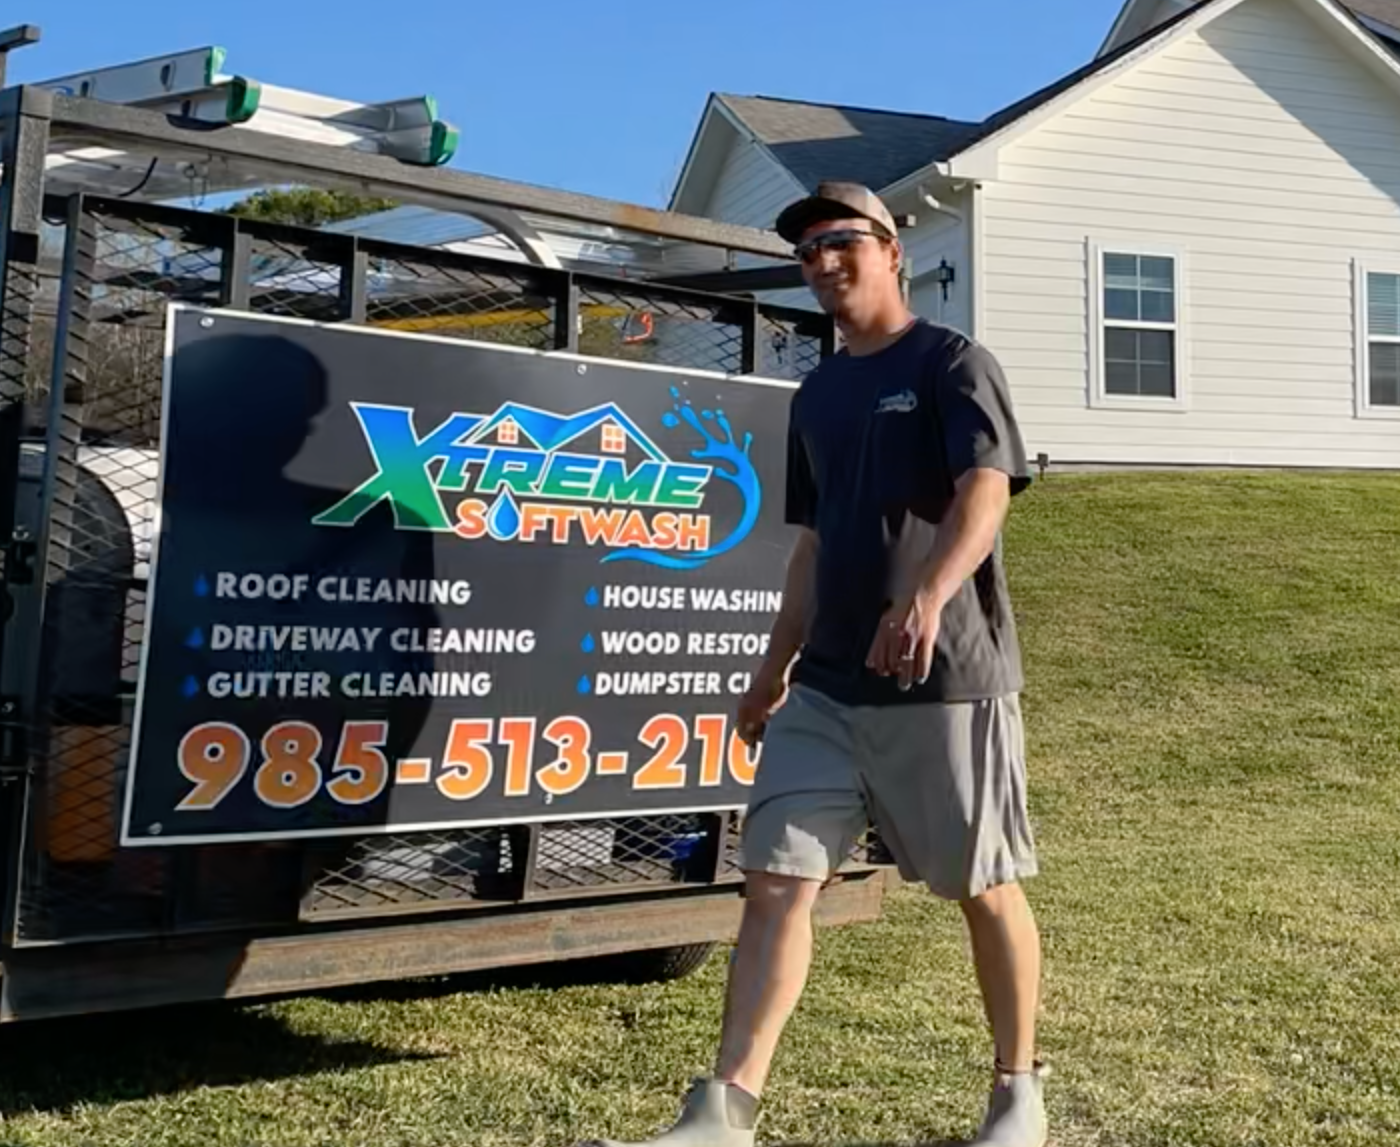 roof cleaning driveway cleaning gutter cleaning house washing wood restoration dumpster cleaning pressure wash soft wash south louisiana